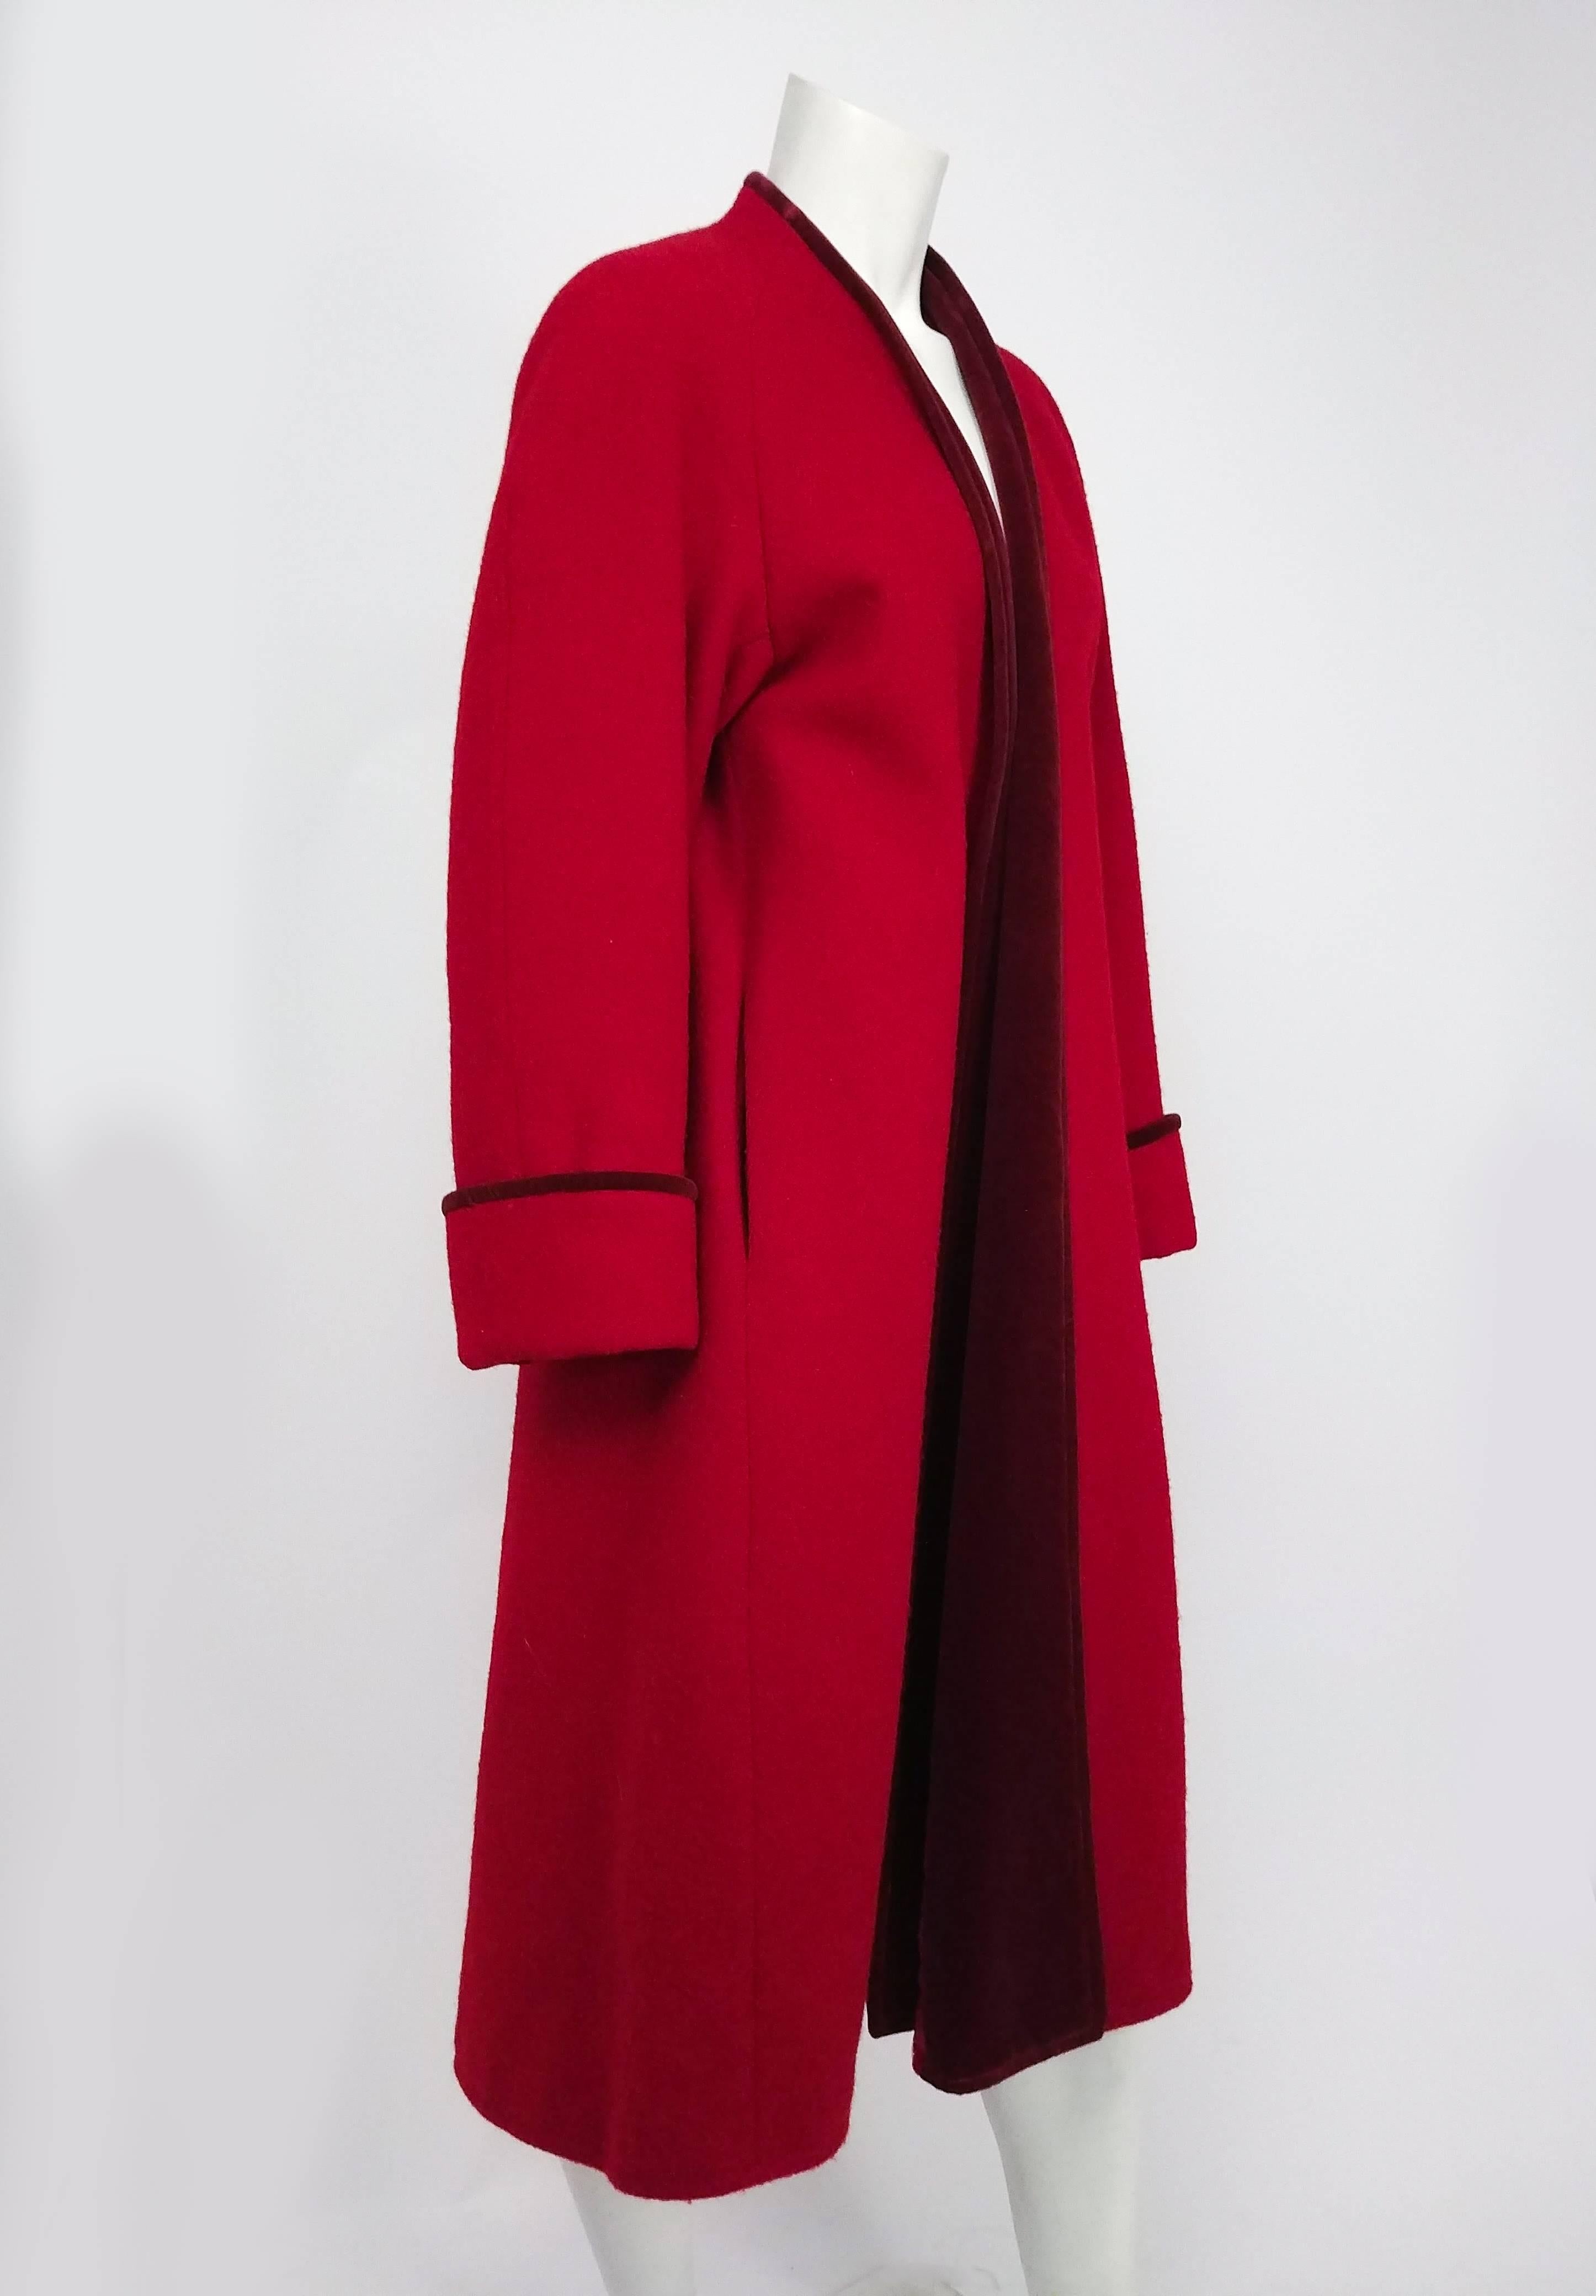 1980s Kenzo Red Wool Coat w/ Velveteen Lapels. No closures, turned up sleeves with matching trim.